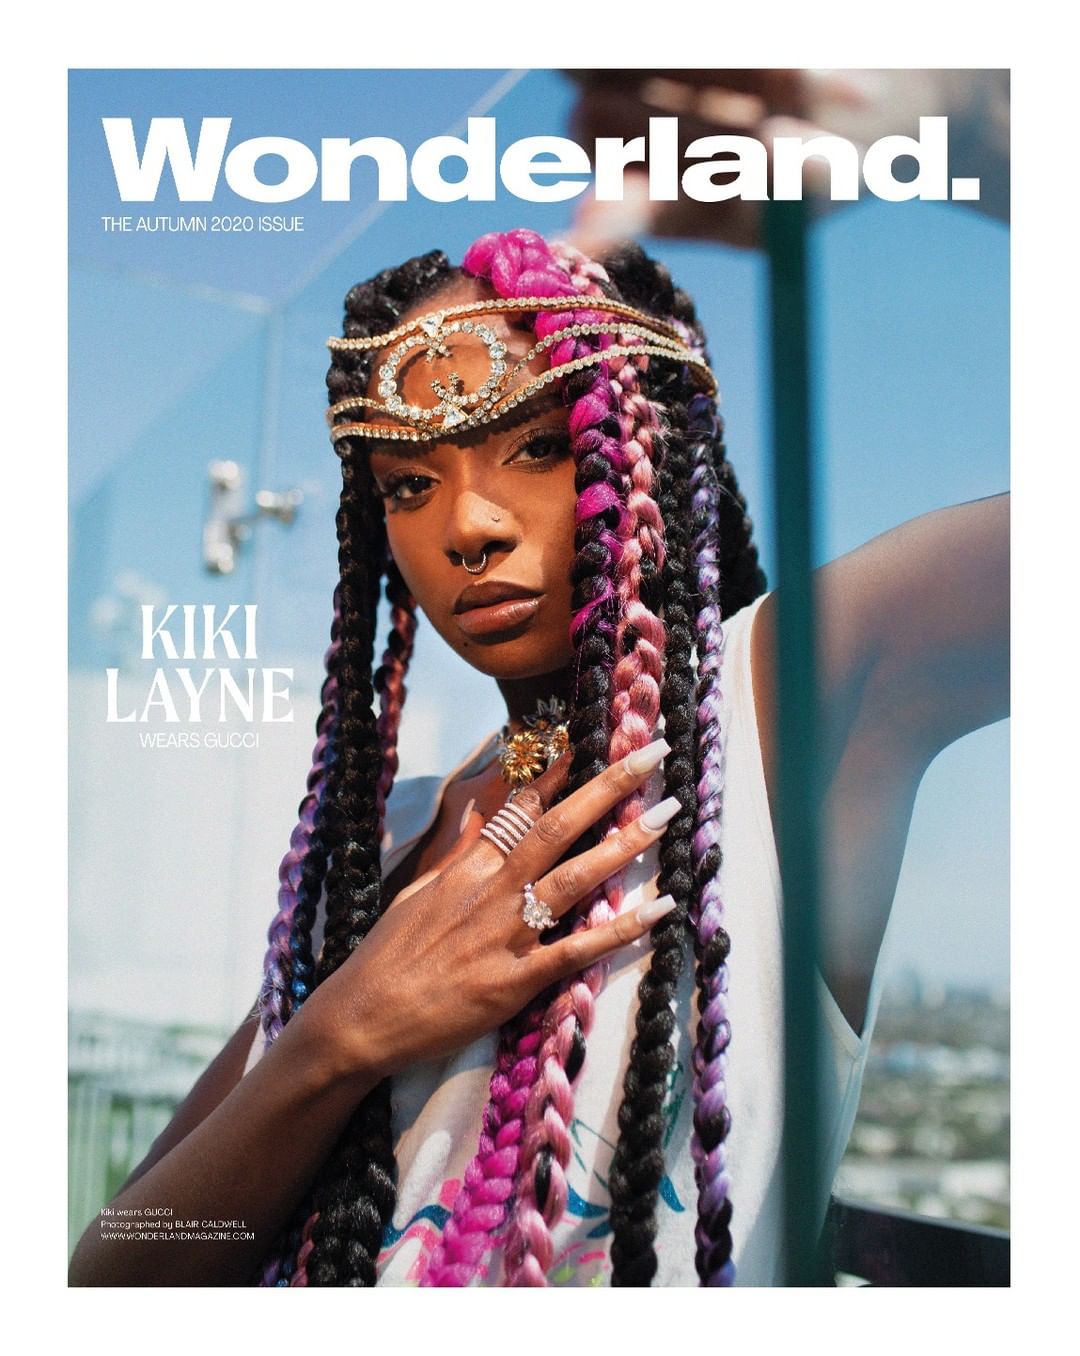 Gucci Official - For the cover of @wonderland’s Autumn 2020 issue, @kikilayne wears #GucciPreFall20 by @alessandro_michele including a cotton jersey tank top with glitter Gucci Hawaii print and crysta...